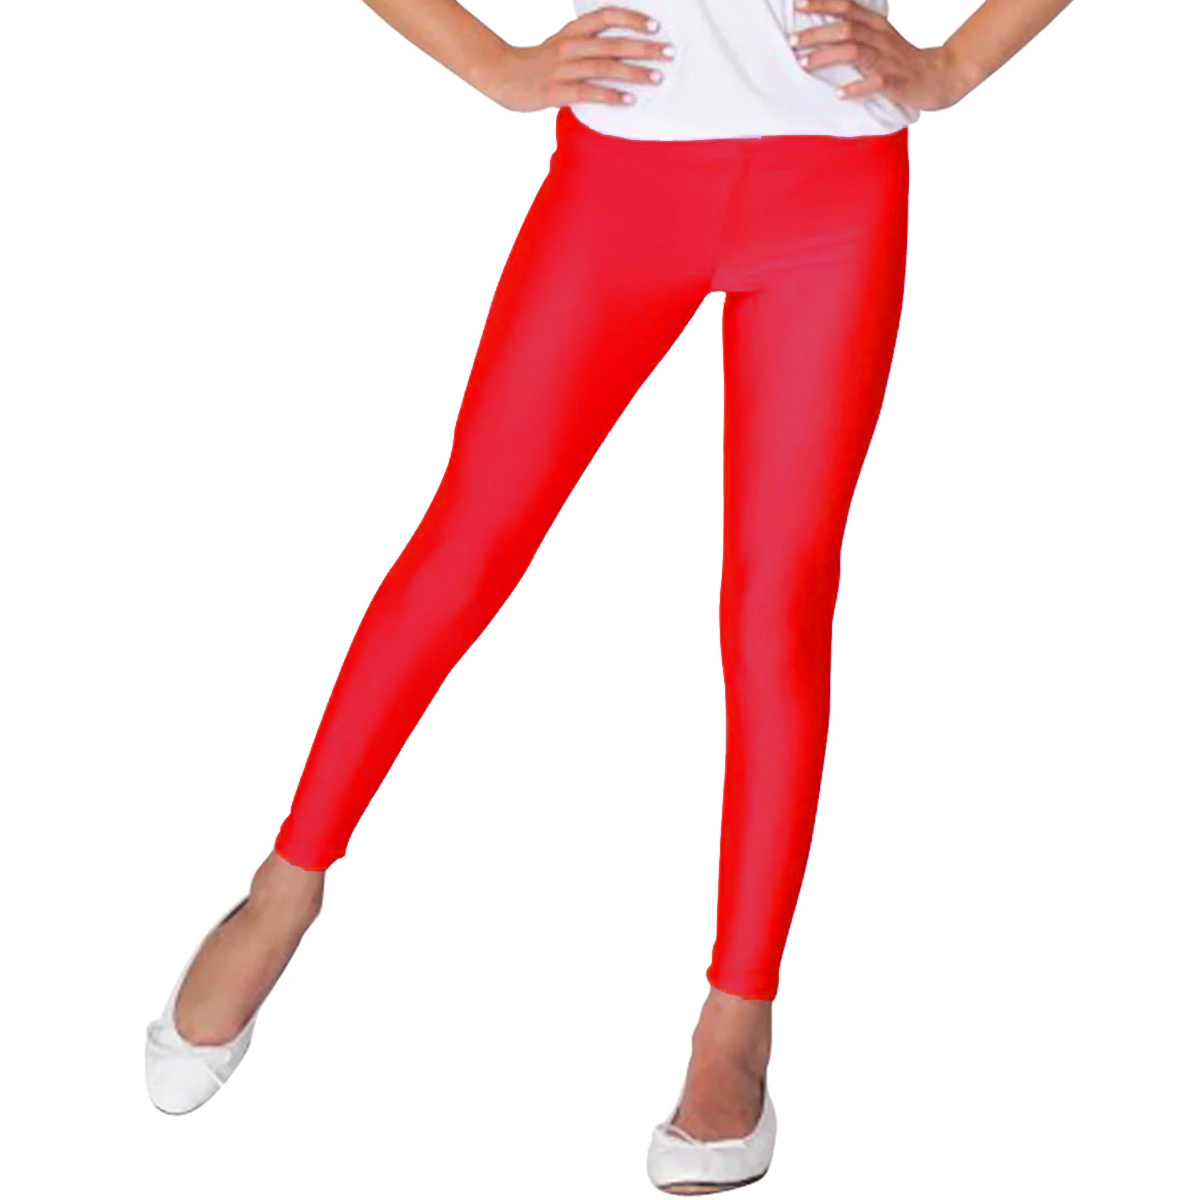 Girls' Polyester Leggings - Small-Large, Red